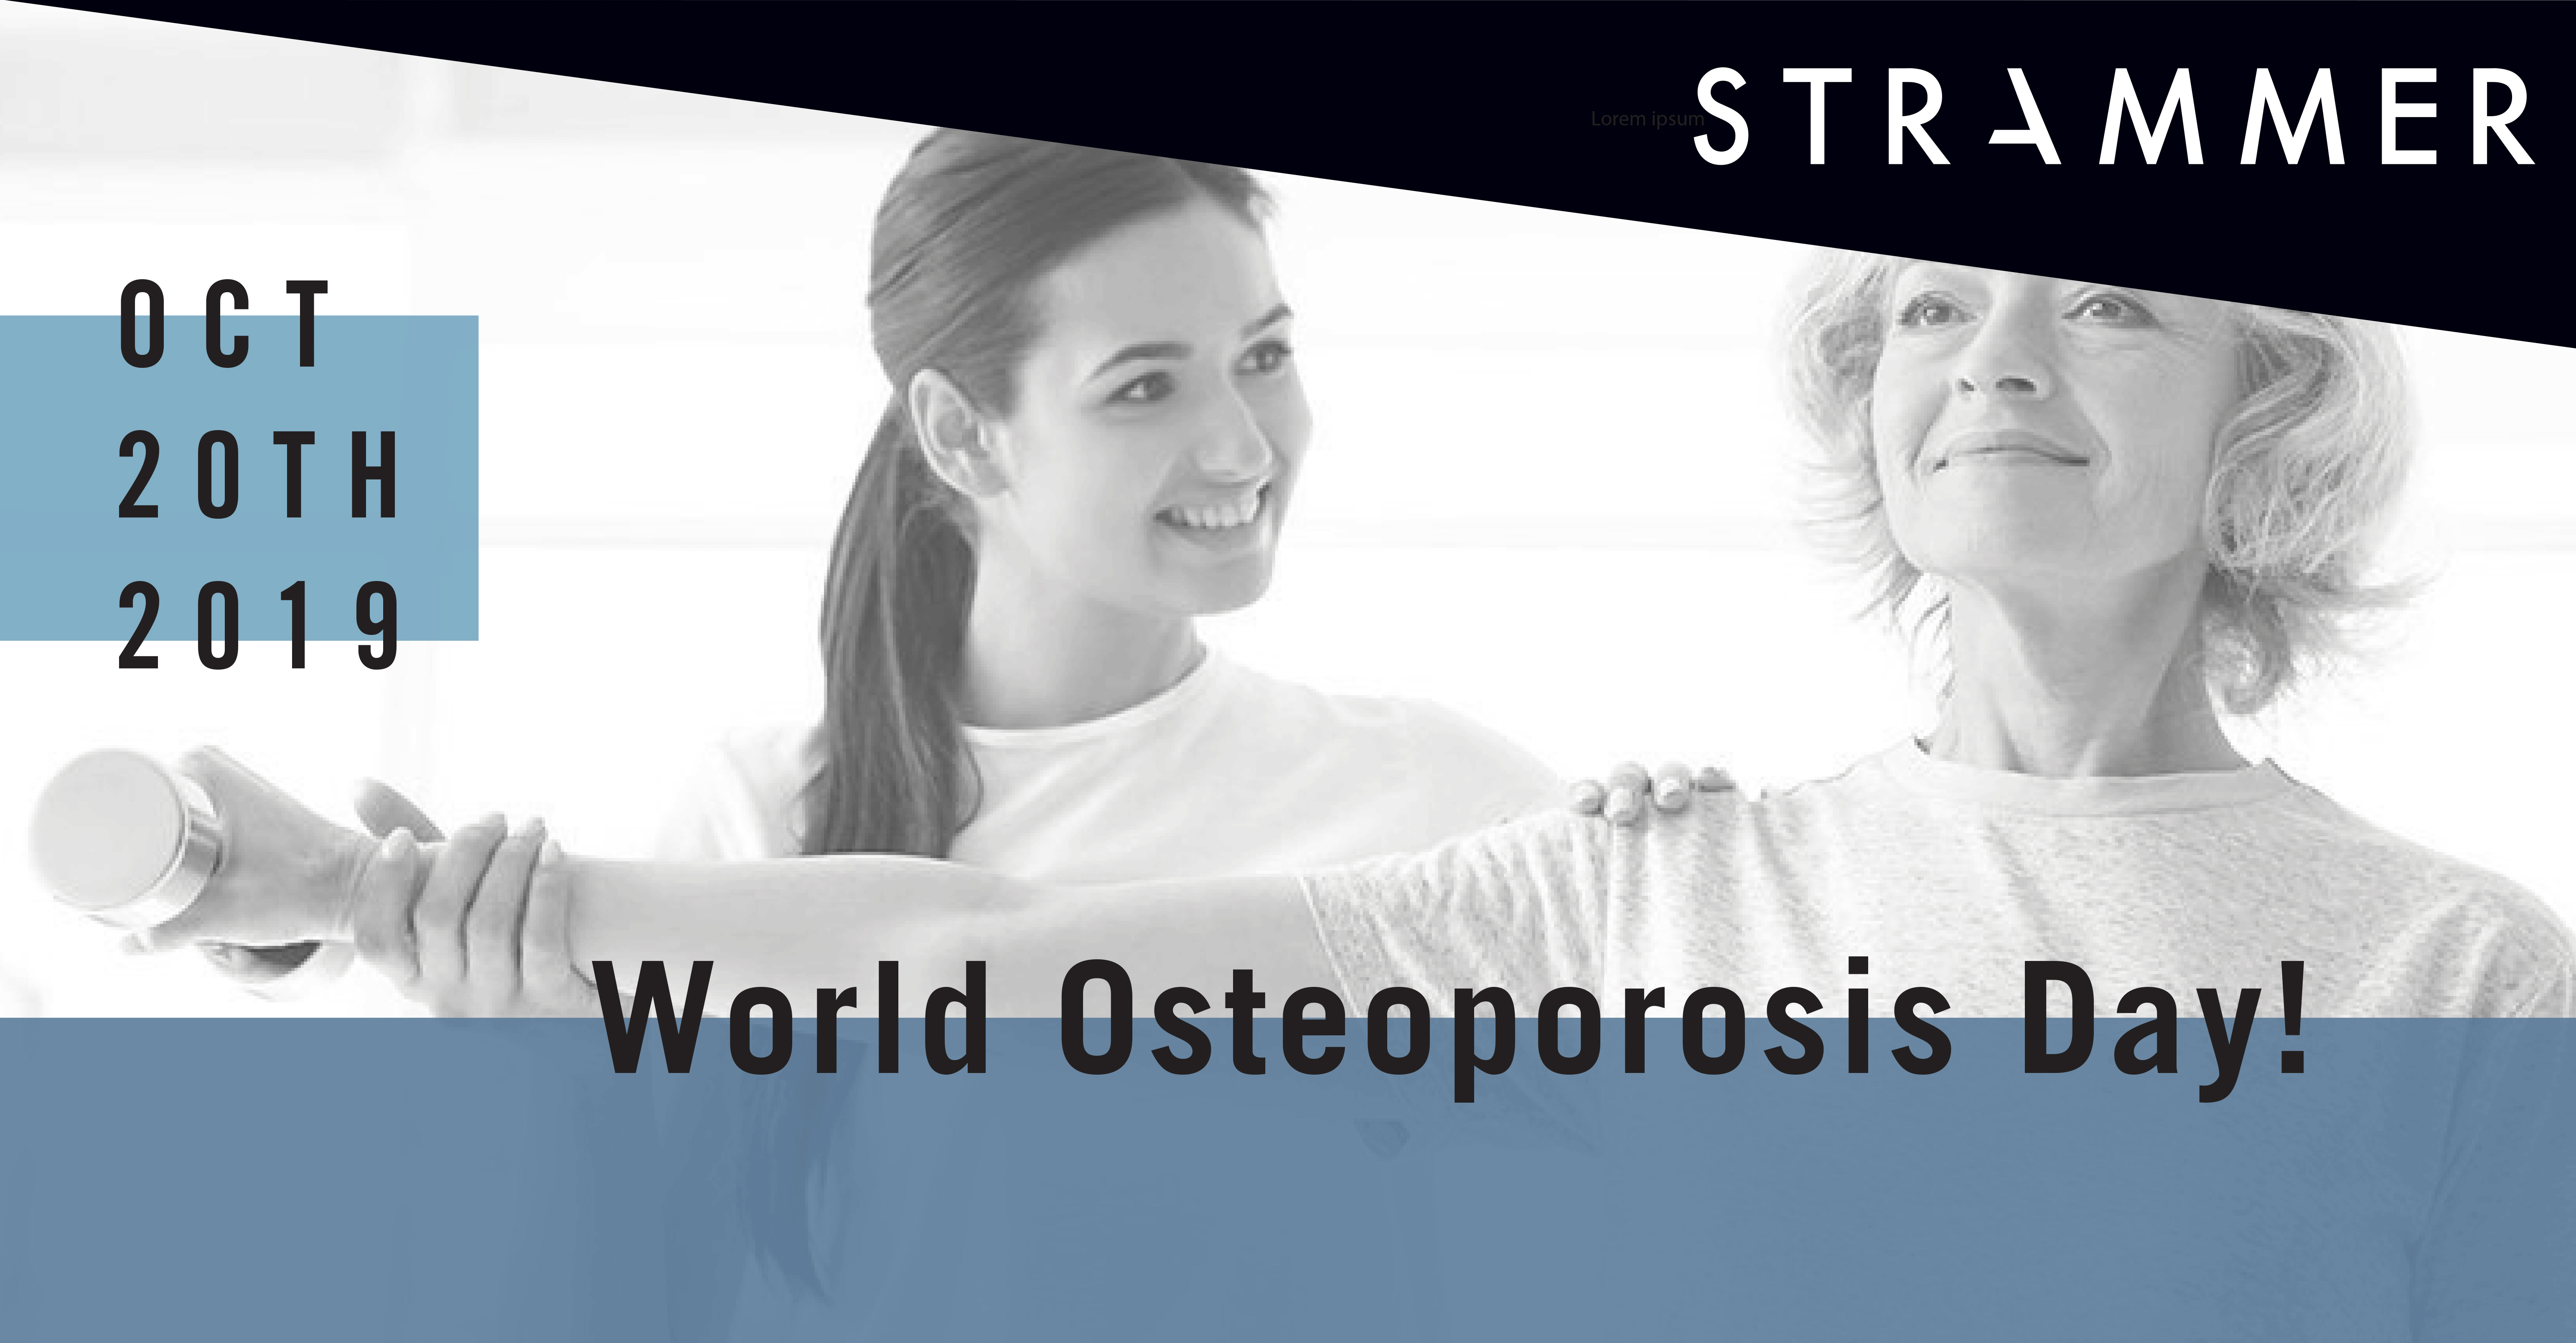 World Osteoporosis Day: October 20, 2019